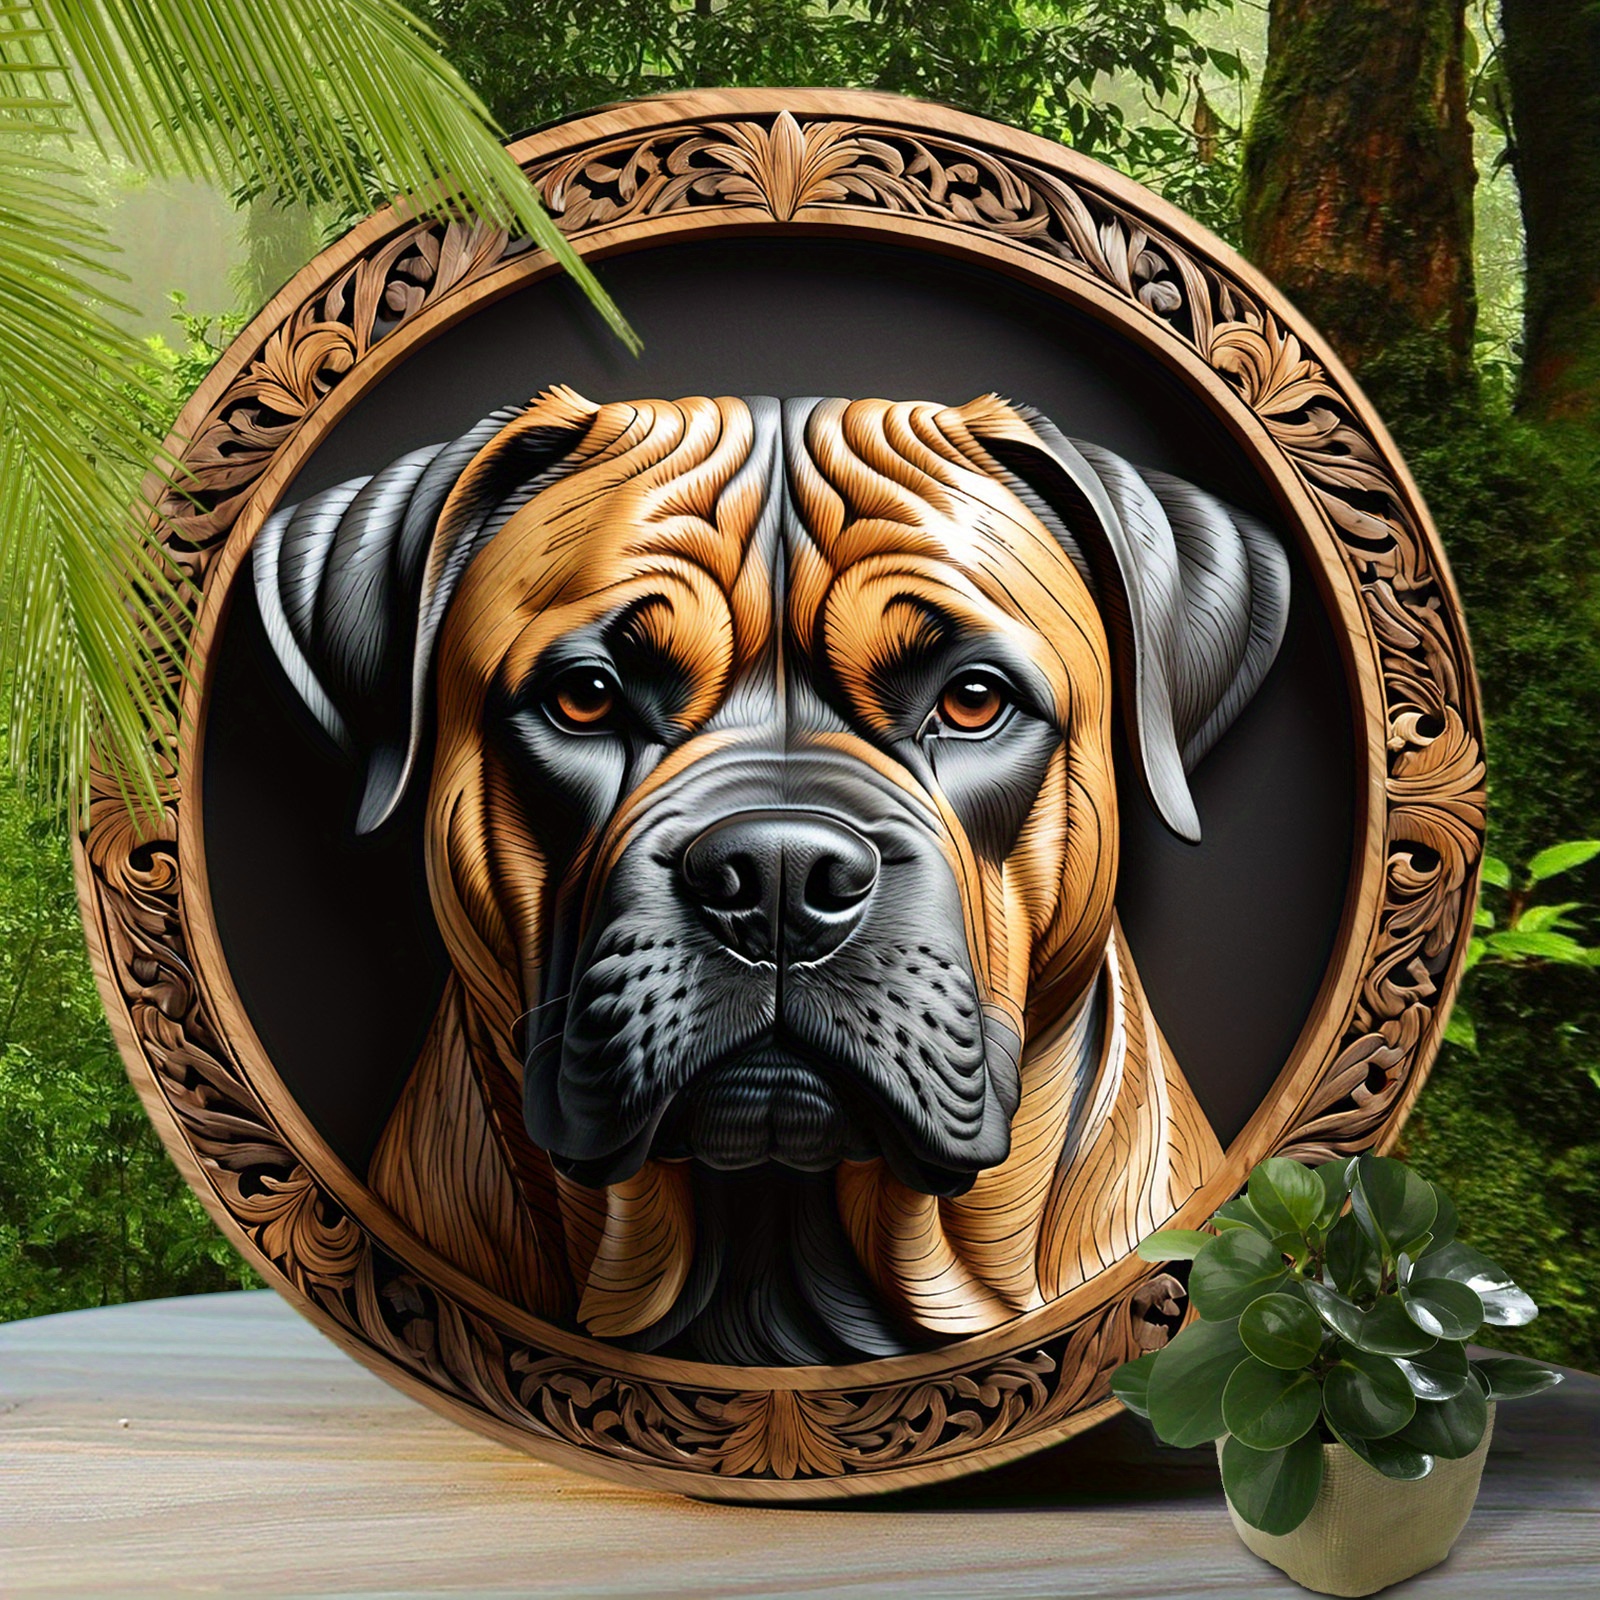 

1pc, Bull Mastiff Dog Sign - Cute Dog Aluminum Sign, Suitable For Home Room Cafe Bedroom Bar Living Room Wall Decor, Round Fashion Art Aesthetic, Holiday Gift (8"x8"/20cm*20cm)